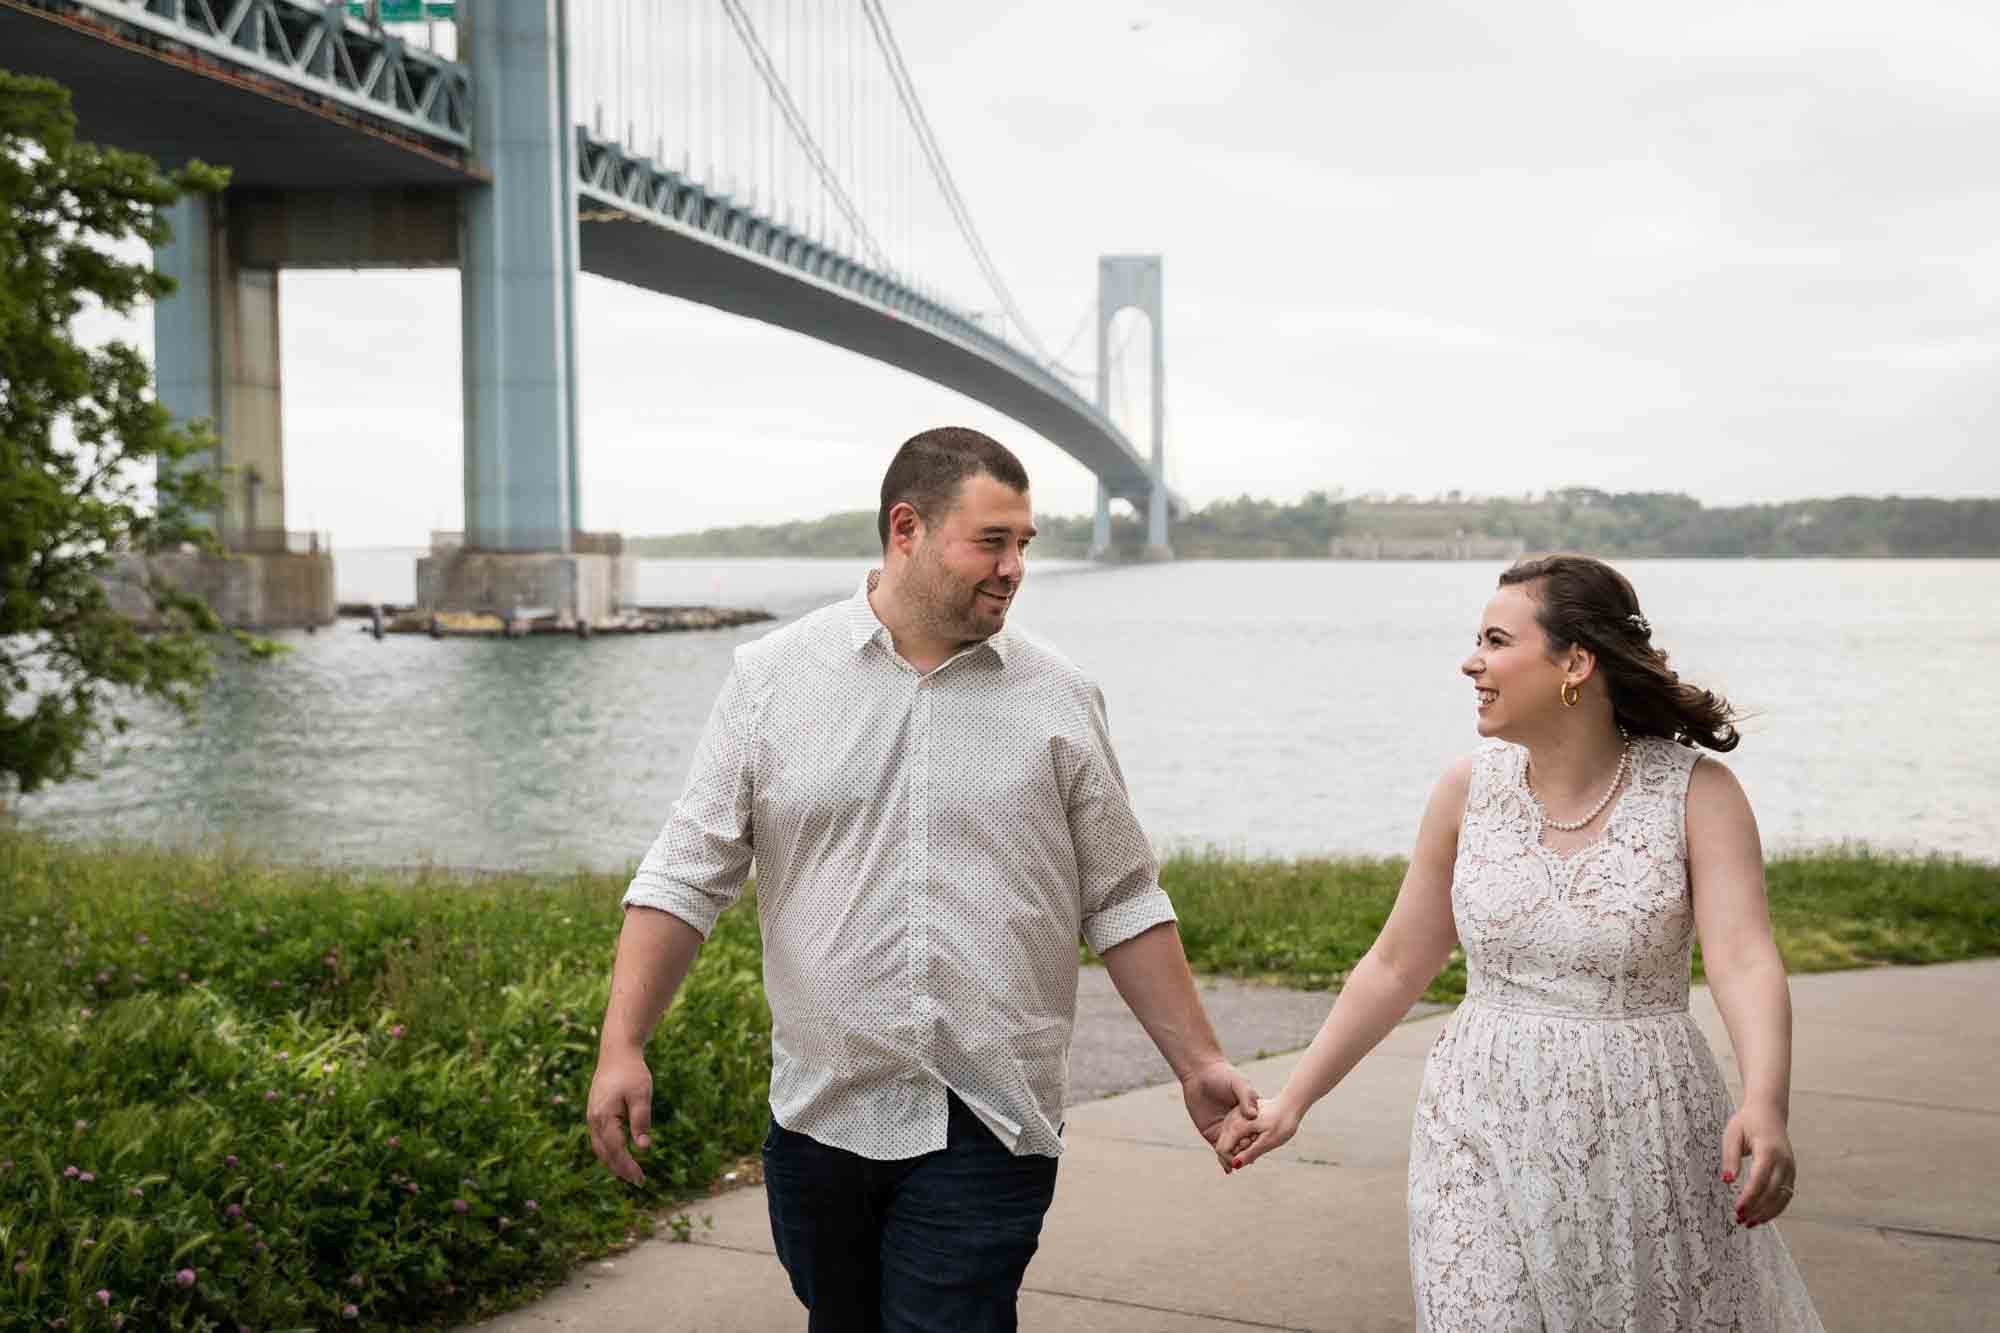 Couple walking on pathway holding hands in front of Verrazano Bridge during a Dyker Heights engagement shoot